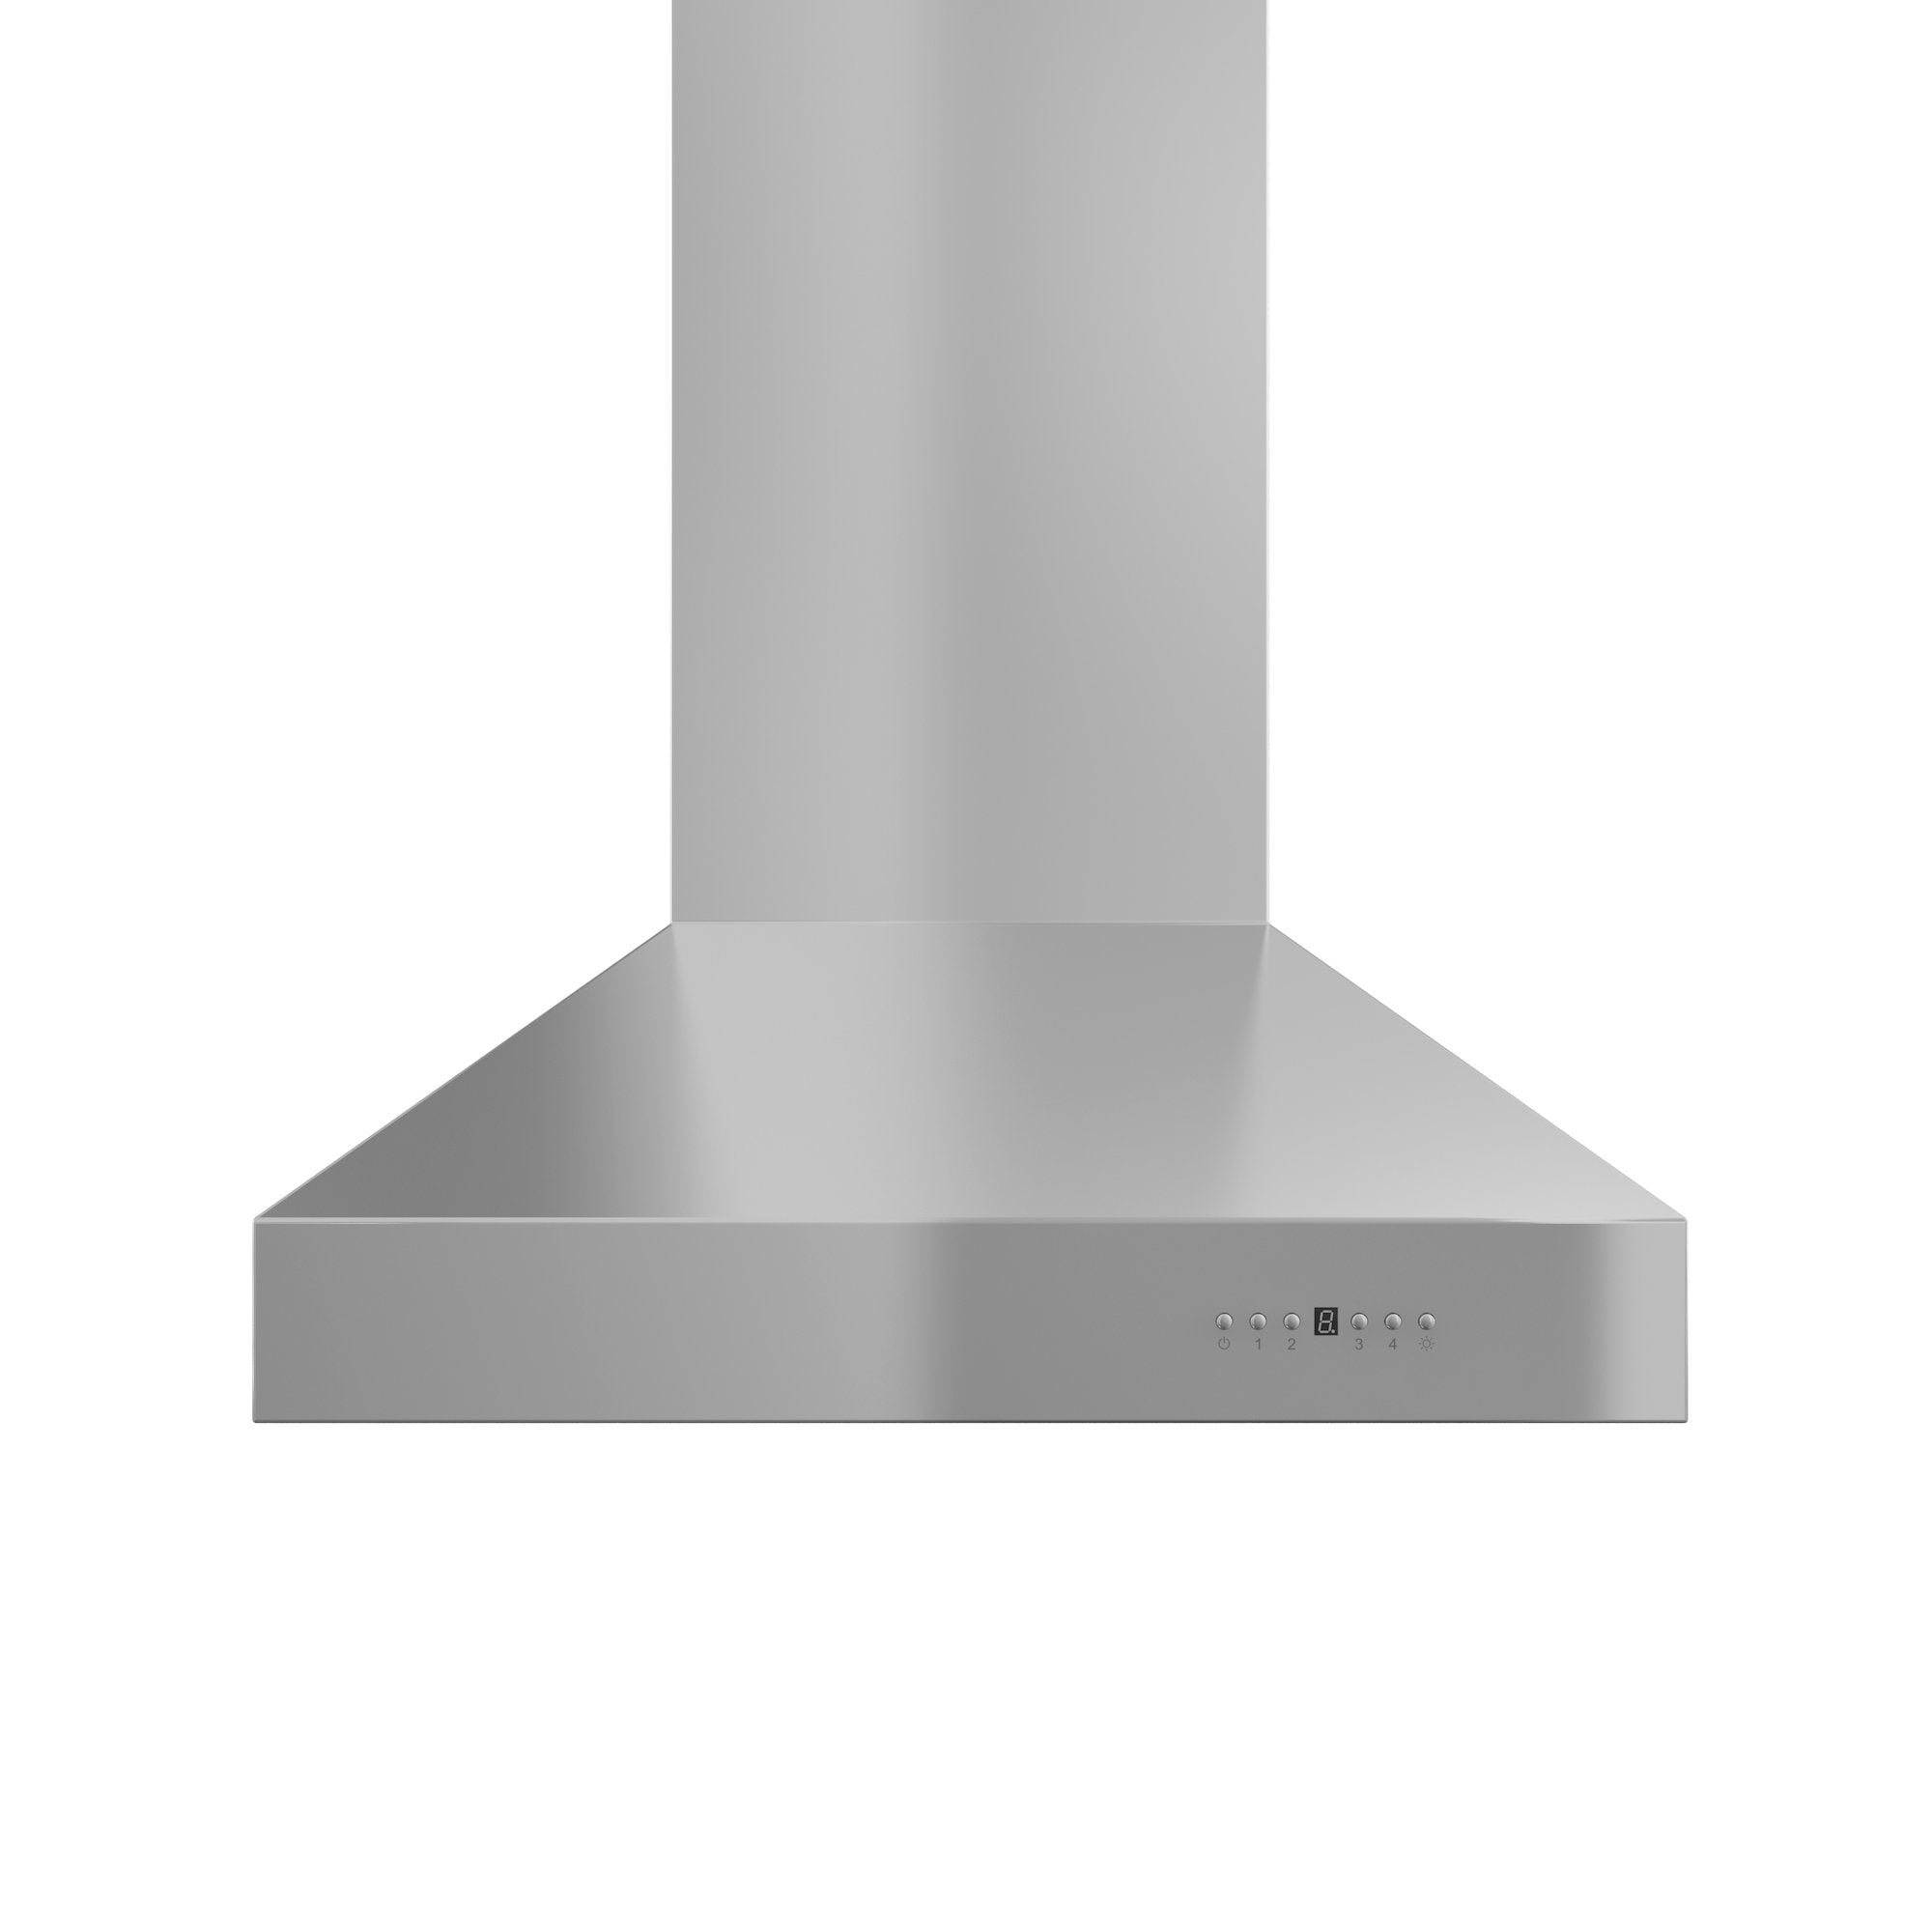 ZLINE 54" Ducted Wall Mount Range Hood in Outdoor Approved Stainless Steel (697-304-54)